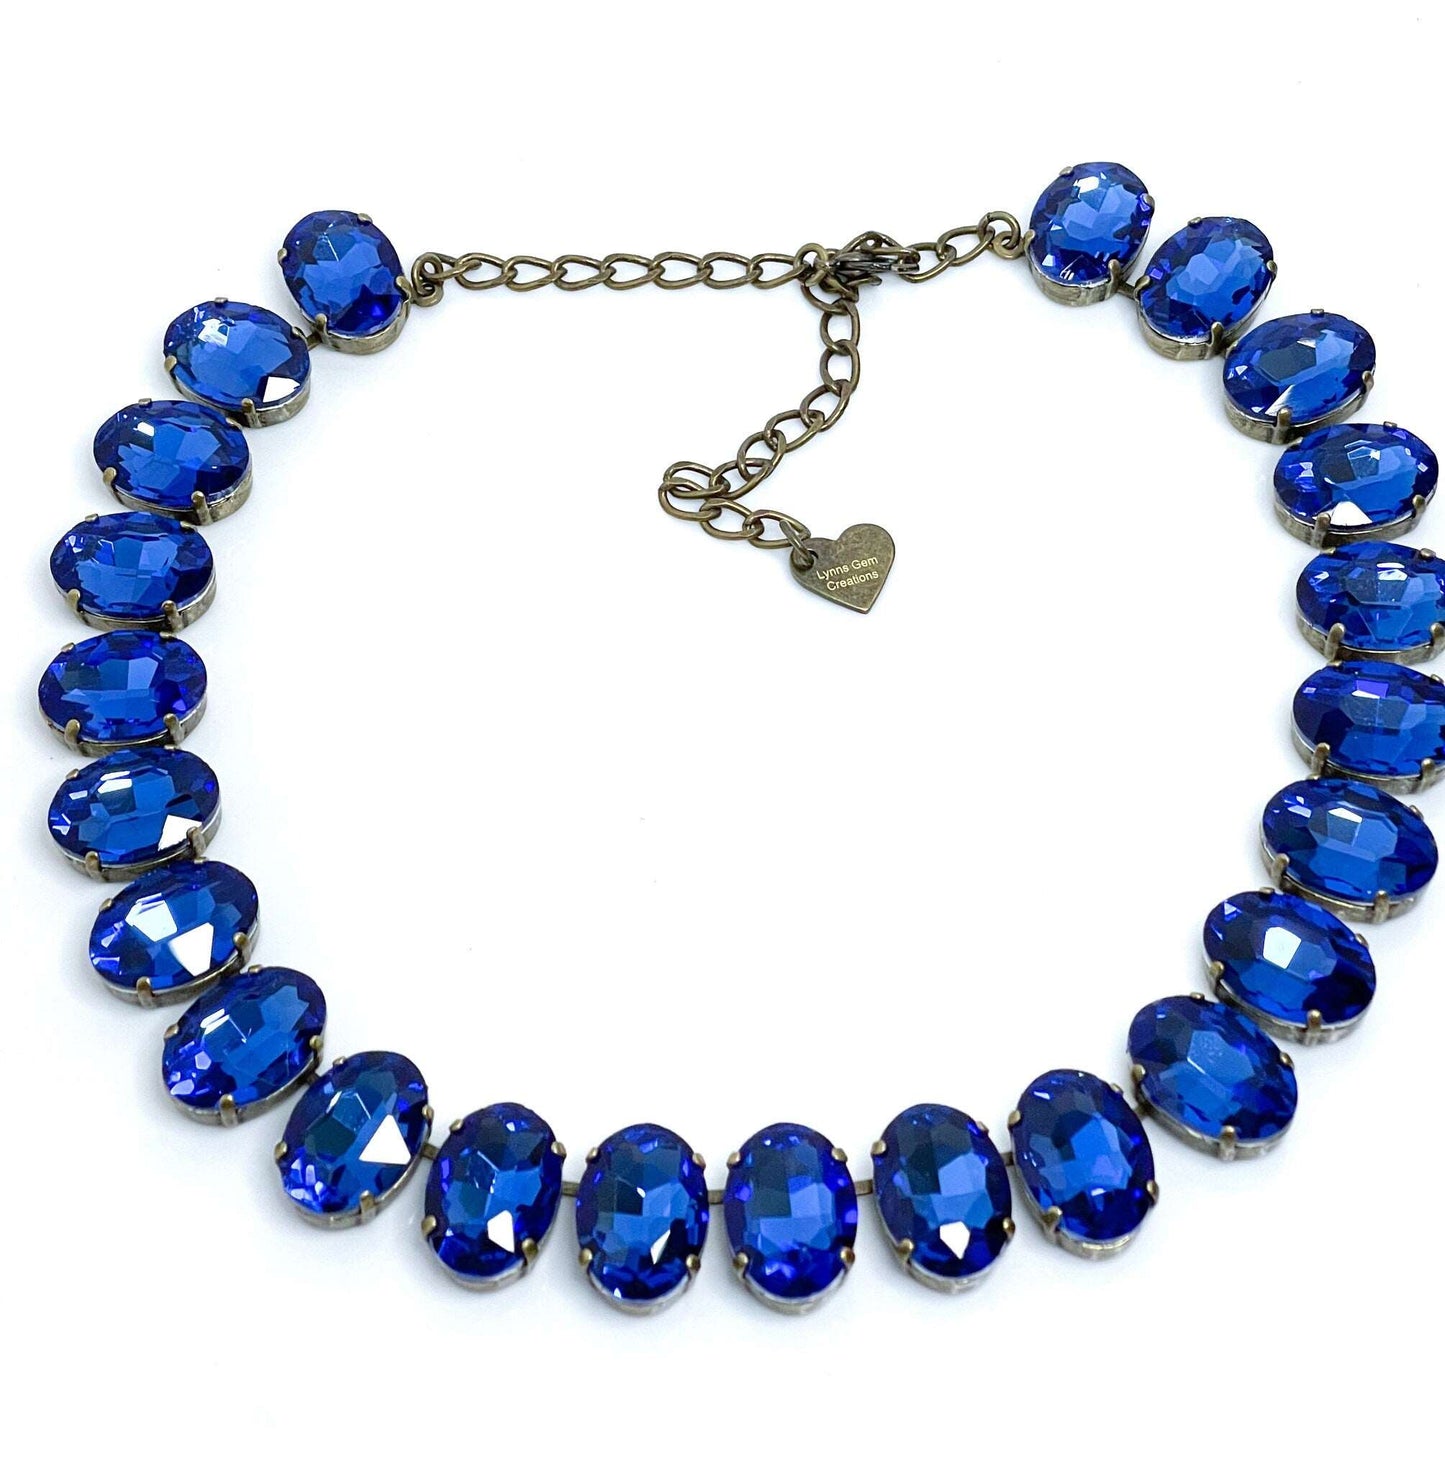 Anna Wintour Necklace, Sapphire Oval Georgian Collet, Crystal Choker, Blue Riviere Necklace, Statement Choker, Necklaces for Women